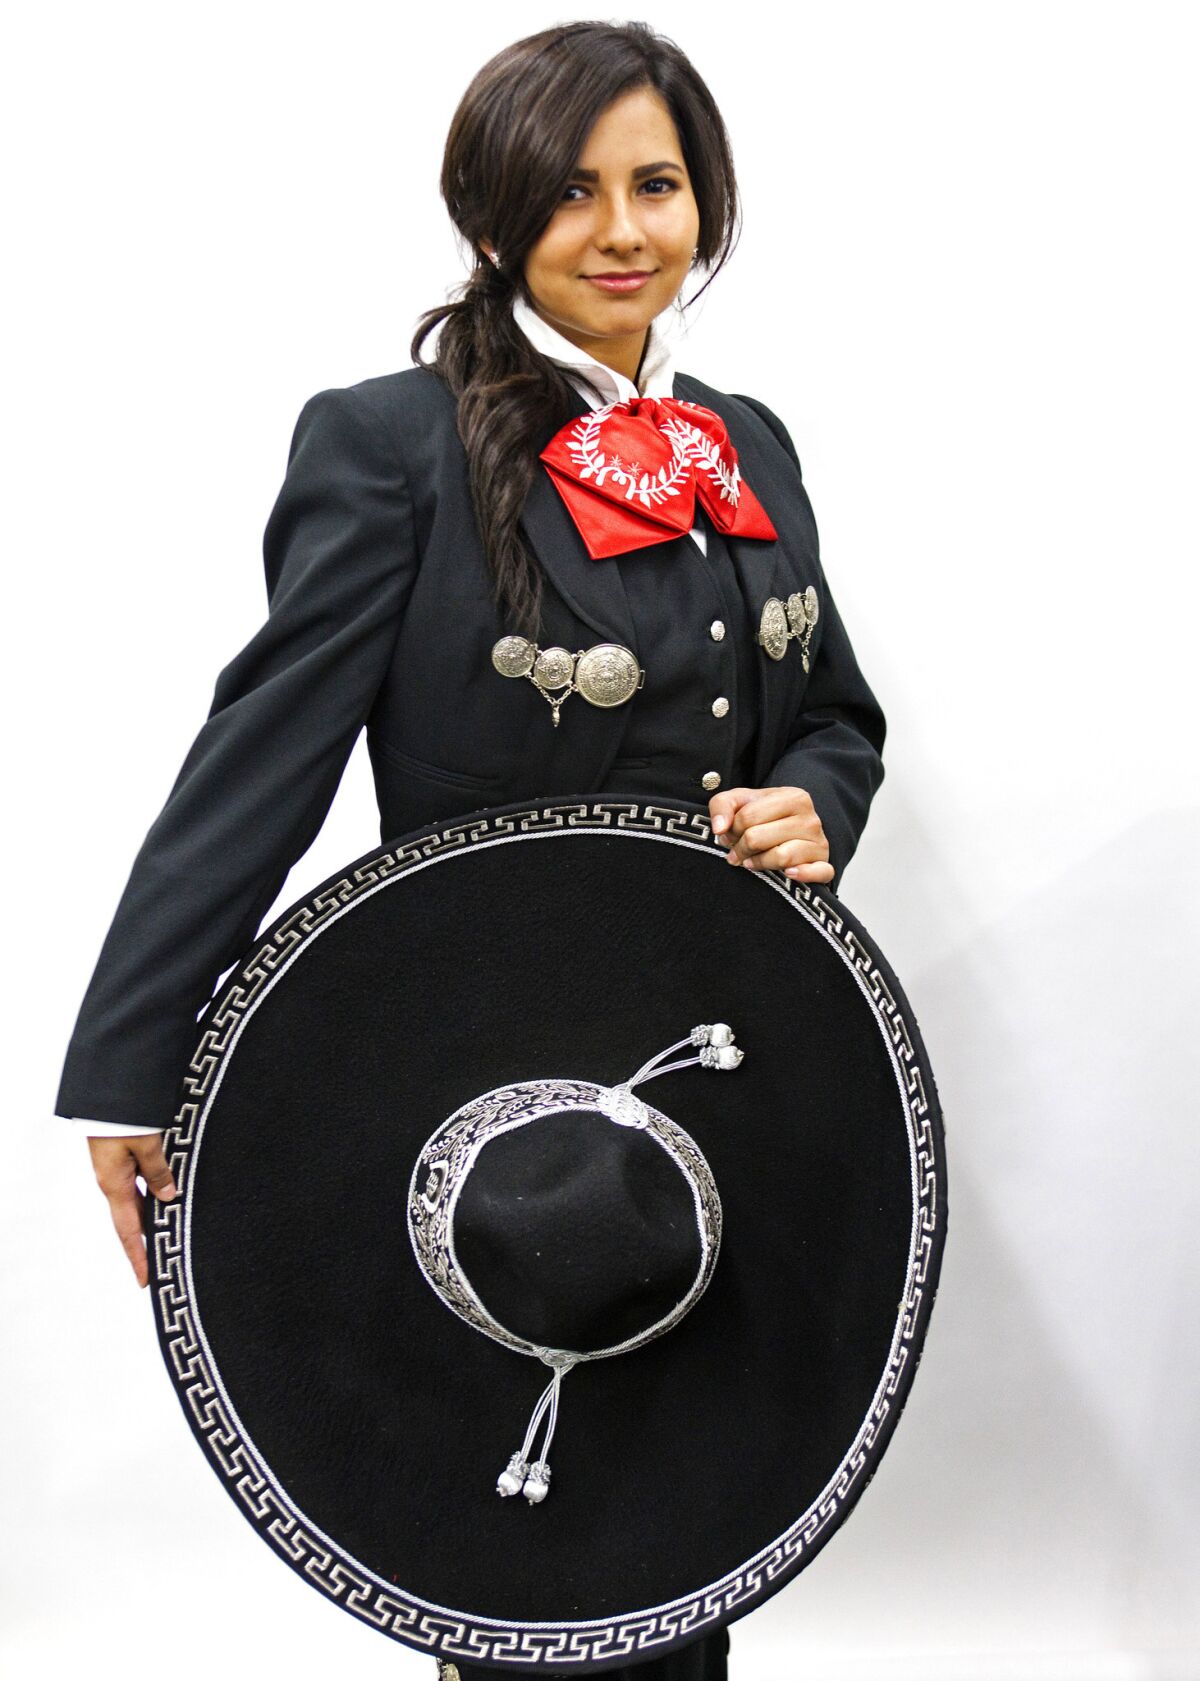 Mariachi Kaylee Guzman, 19, shows off her Tello-crafted suit.